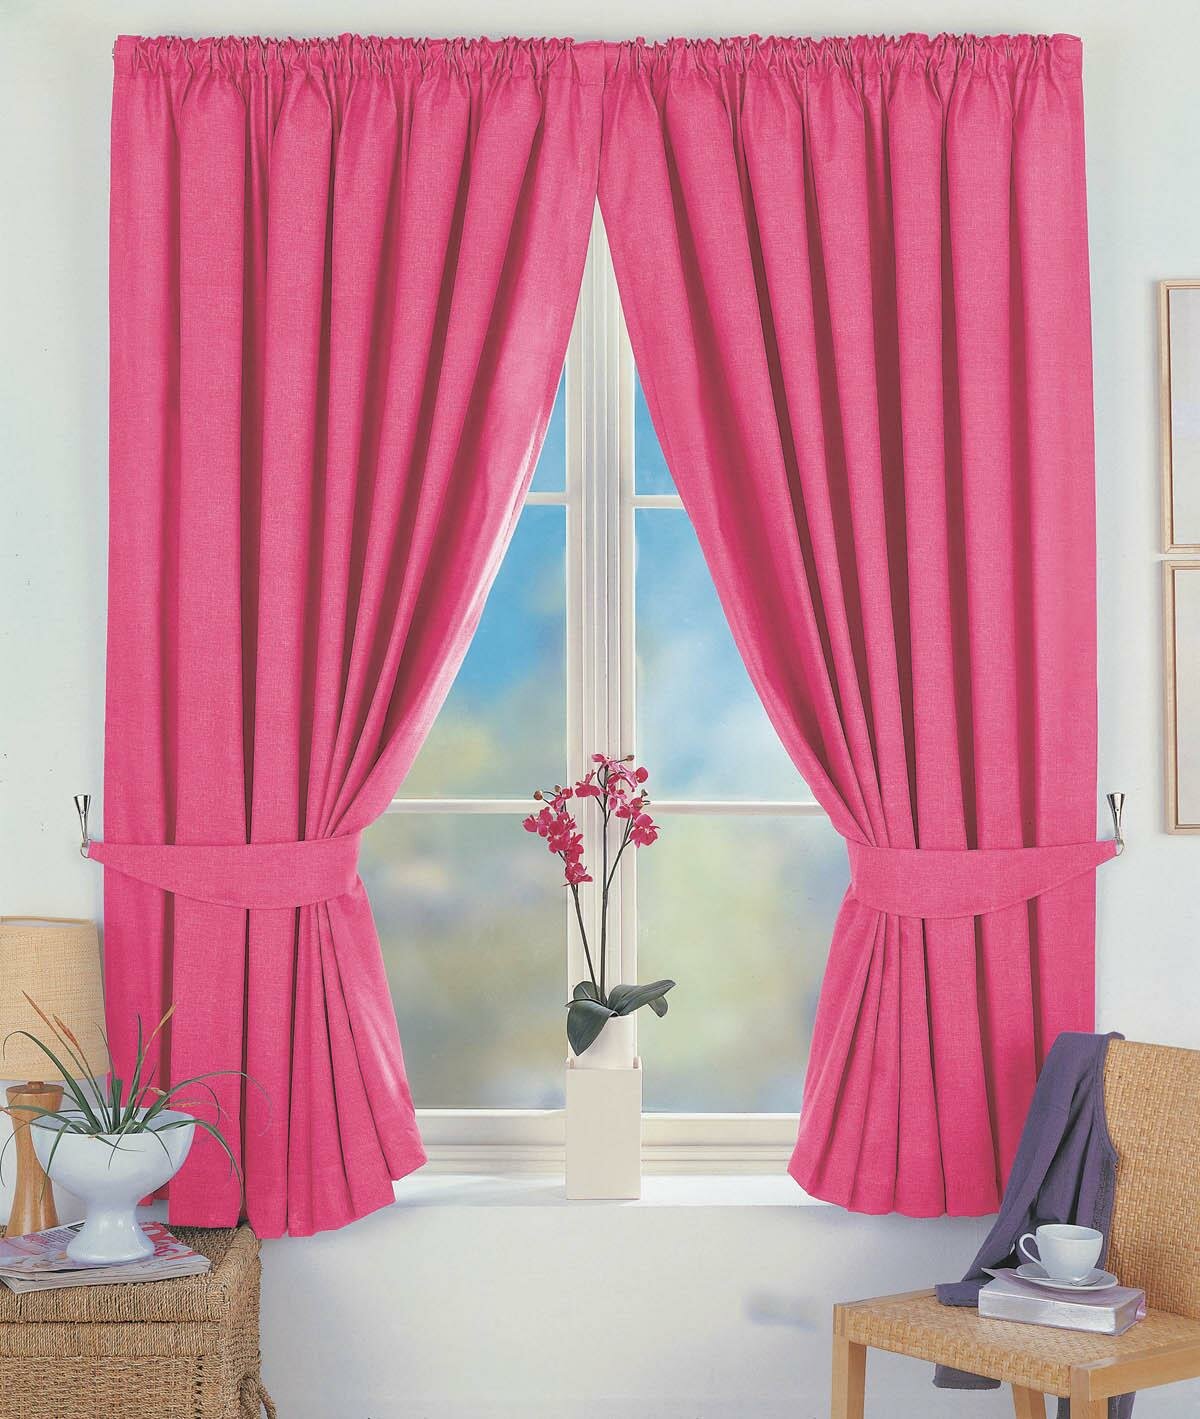 Blackout Lined Curtains | Cheap Blackout Curtains | Discount Thermal Curtains